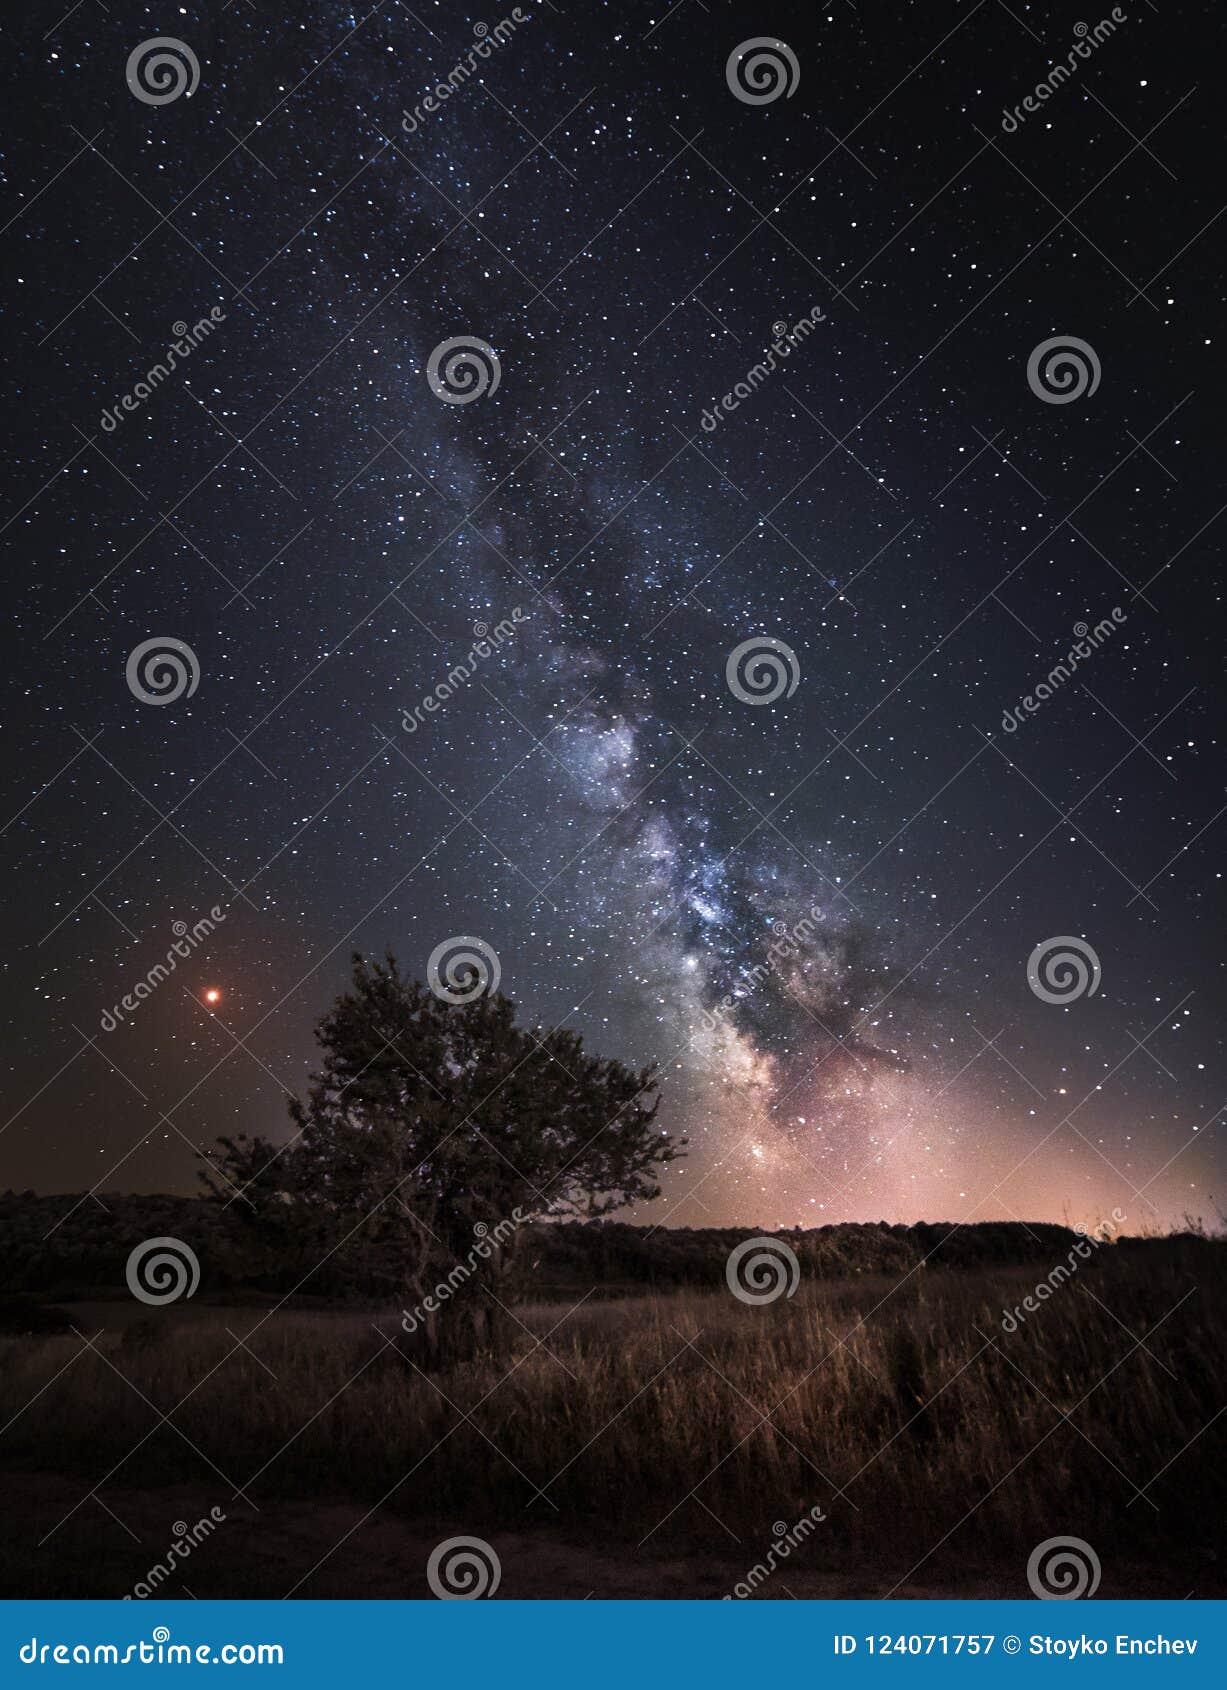 silhouette of tree with natural landscape and milky way galaxy.